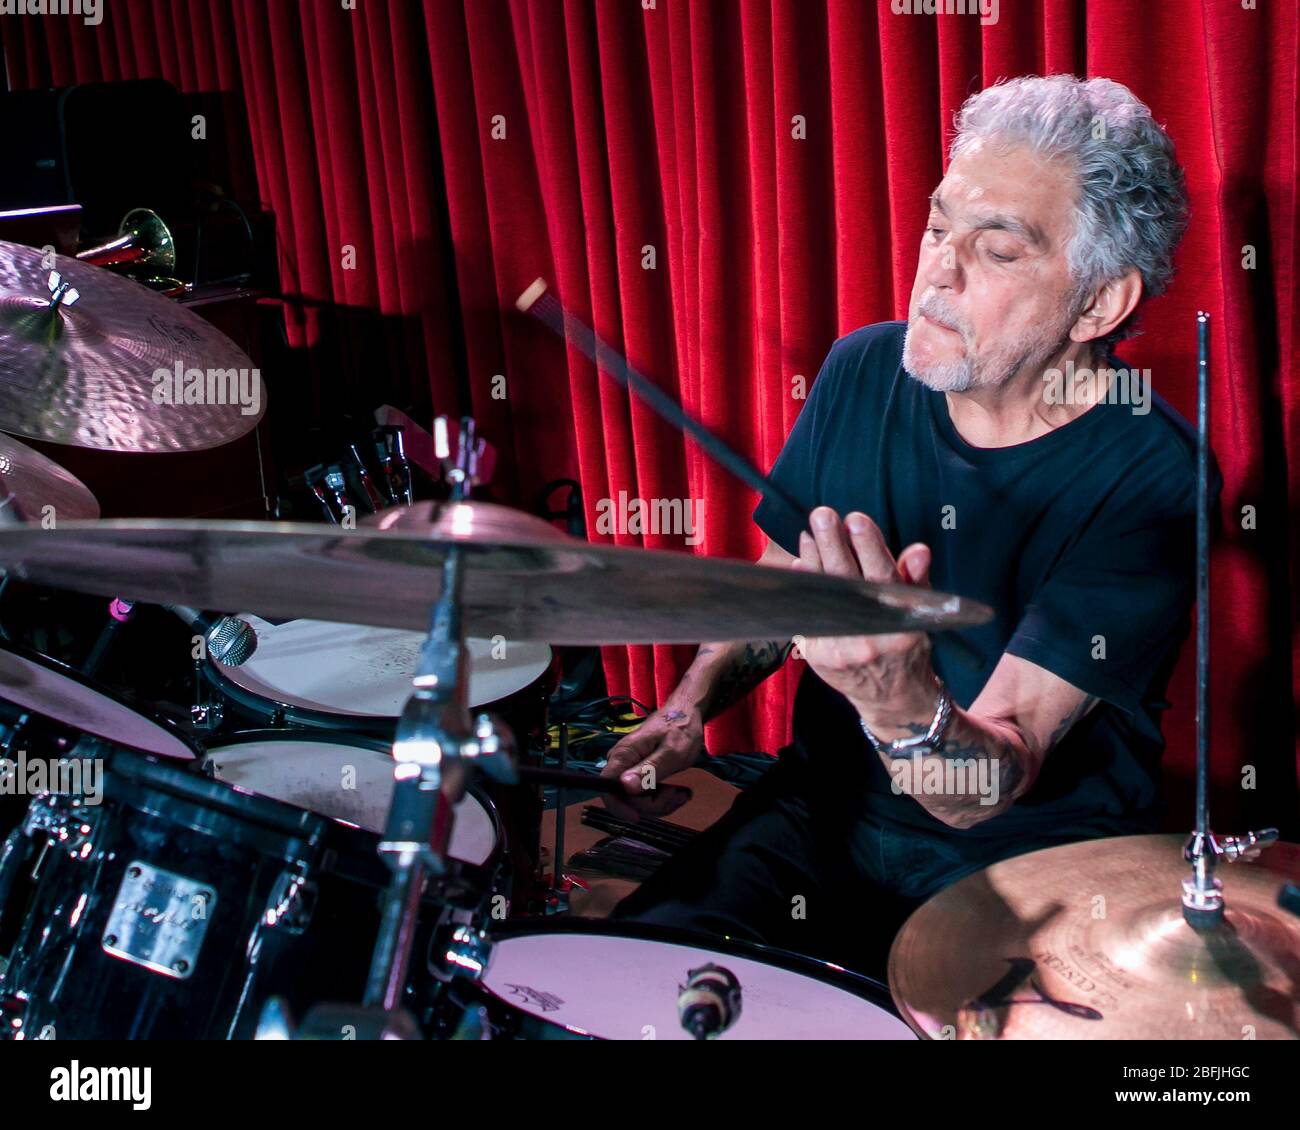 Drummer Steve Gadd warms up before a show with his band, the Steve Gadd Band, at the Catalina Jazz Club in Los Angeles, California. Stock Photo